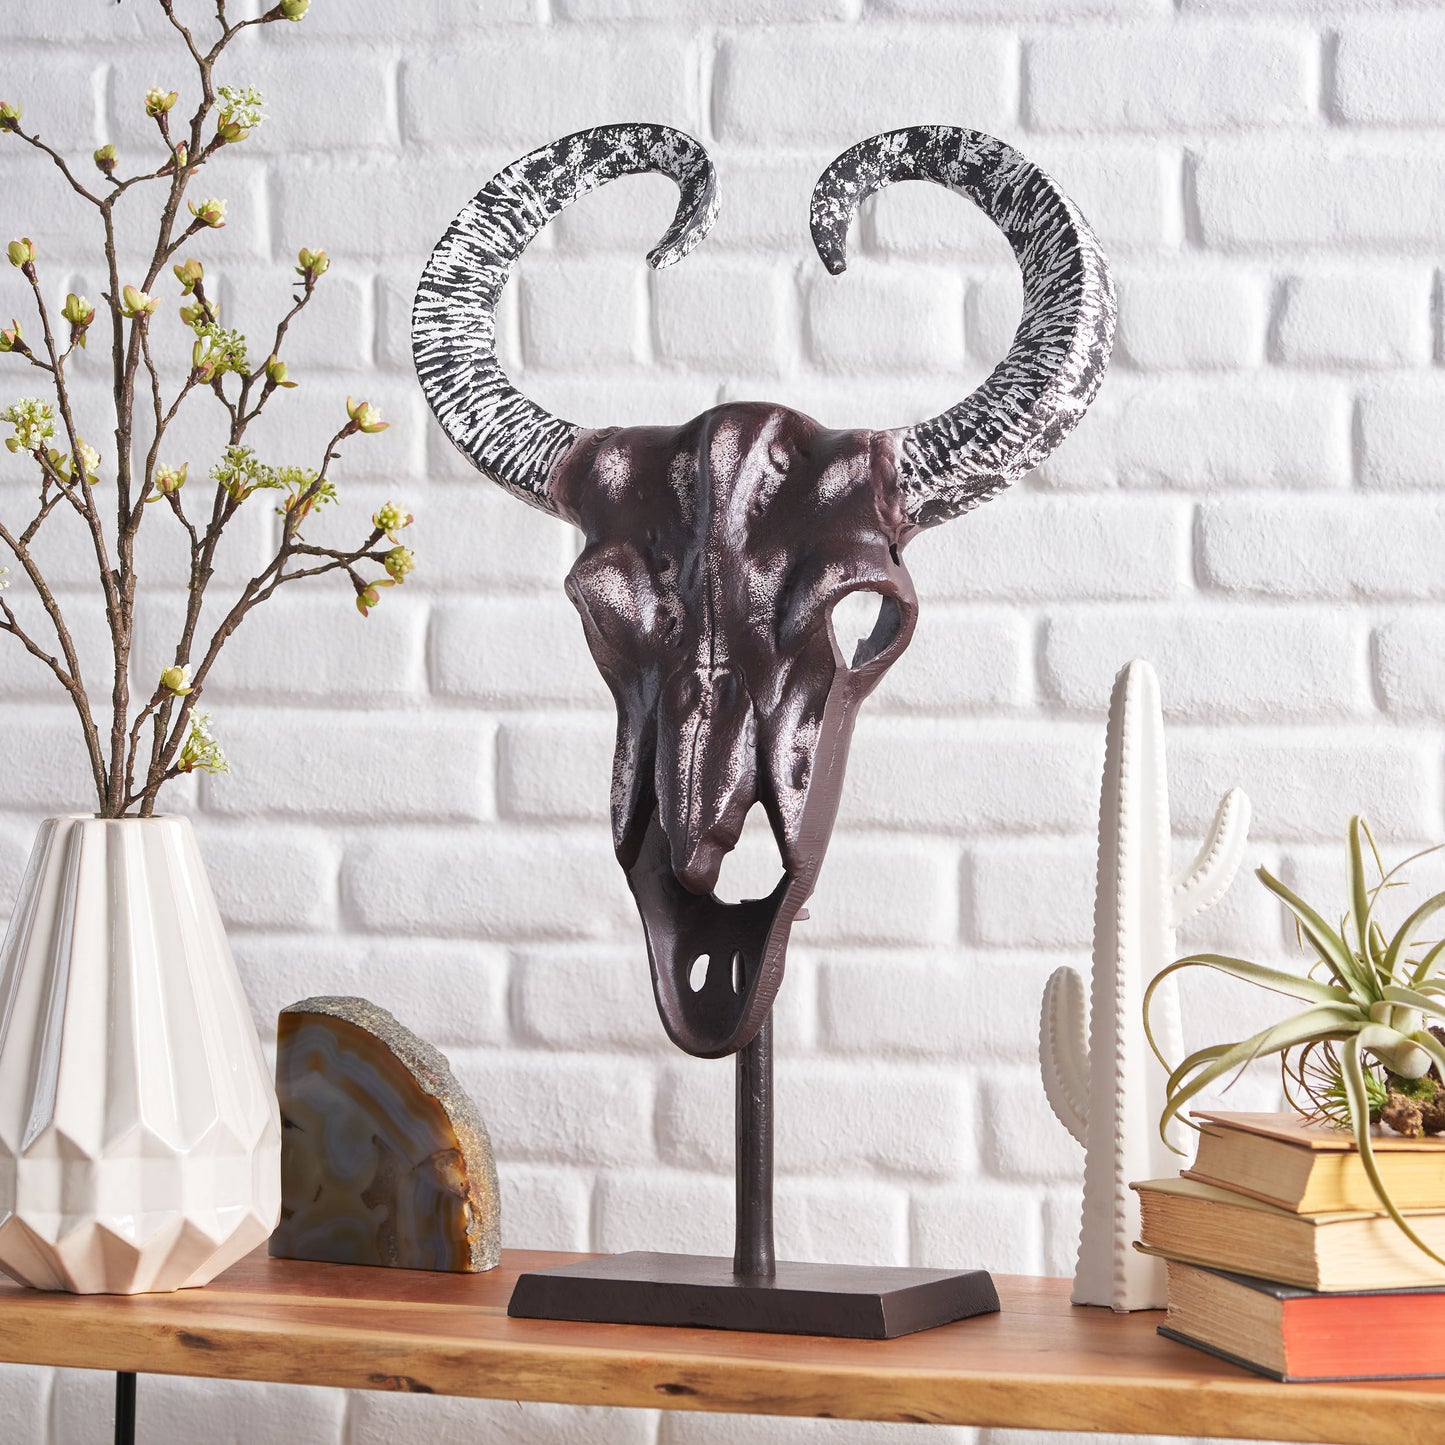 Blalock Handcrafted Aluminum Bull Skull Decor with Stand